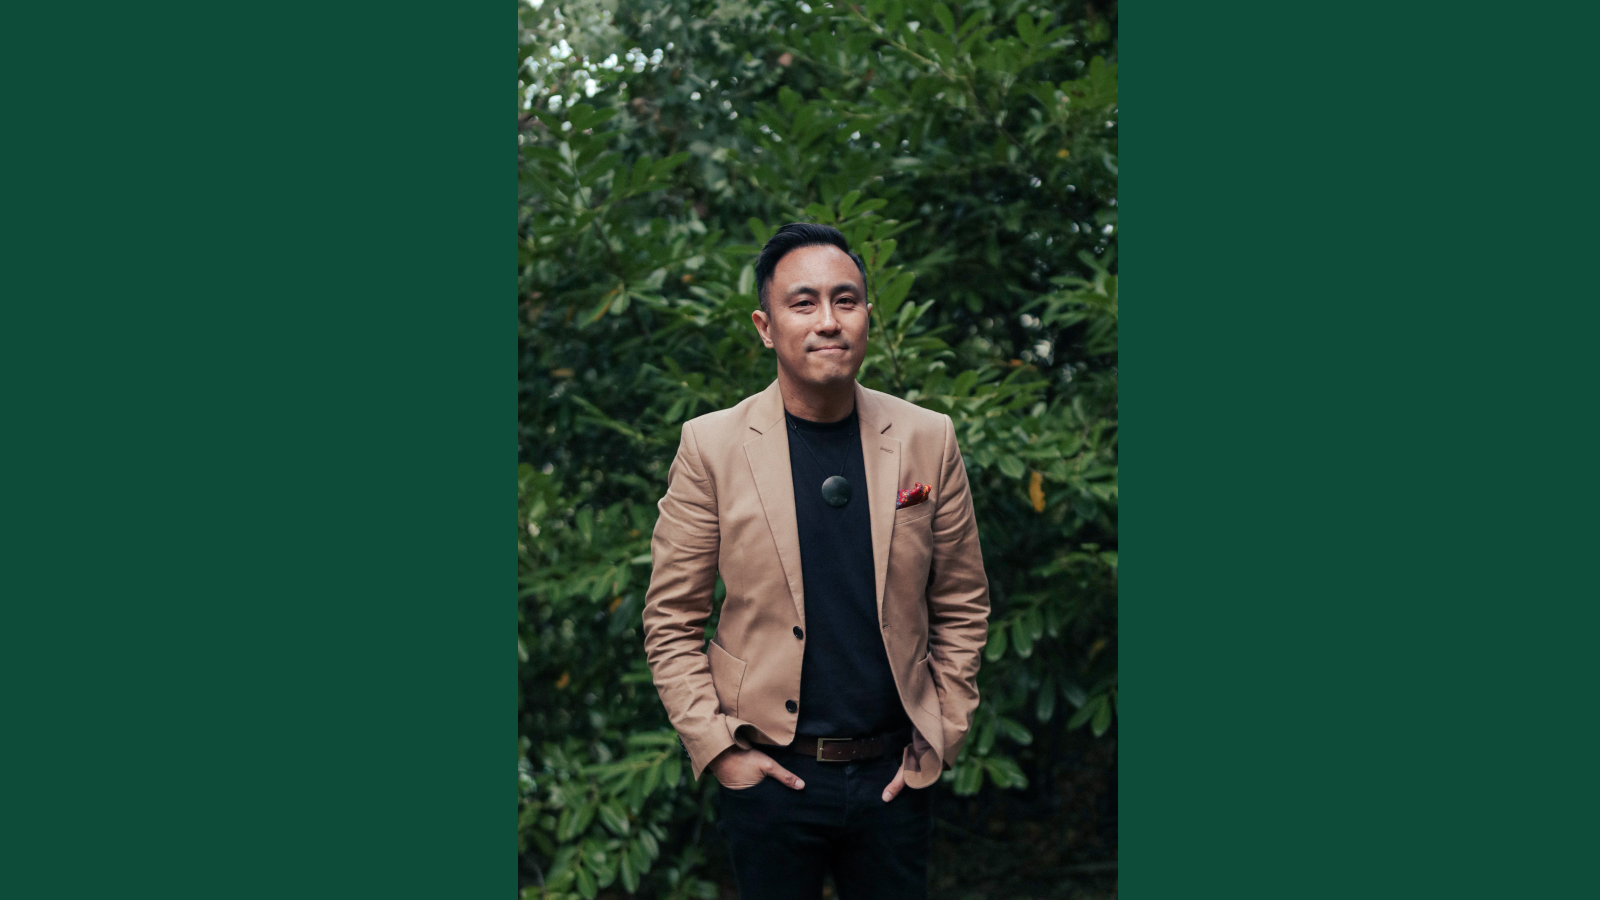 Chris Tse is standing in front of some bushes wearing a blazer with his hands in his pockets and smiling at the camera. 